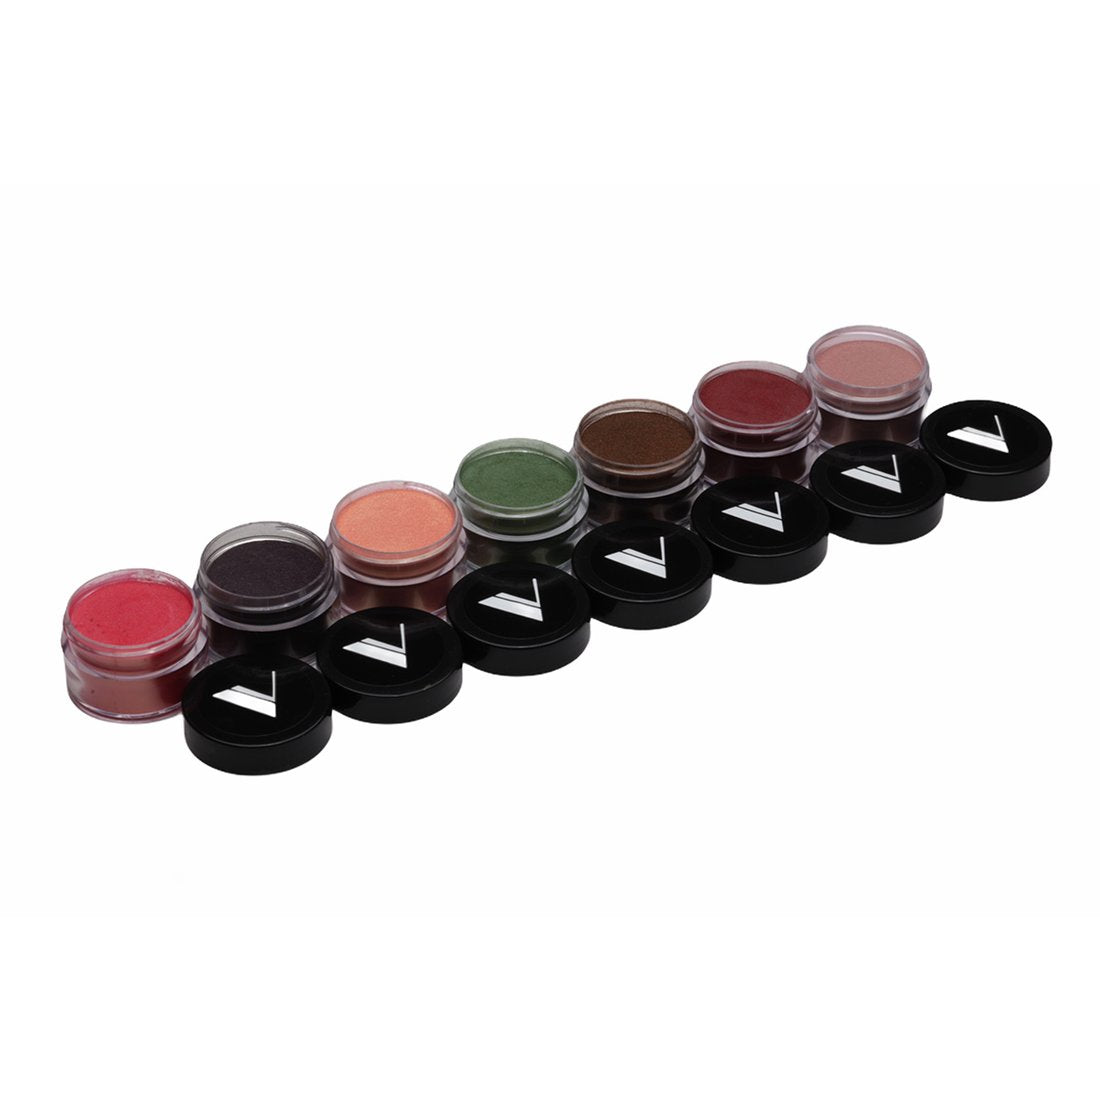 Valentino Beauty Pure - Coloured Acrylic Powder (Falling For You Collection) #140-146